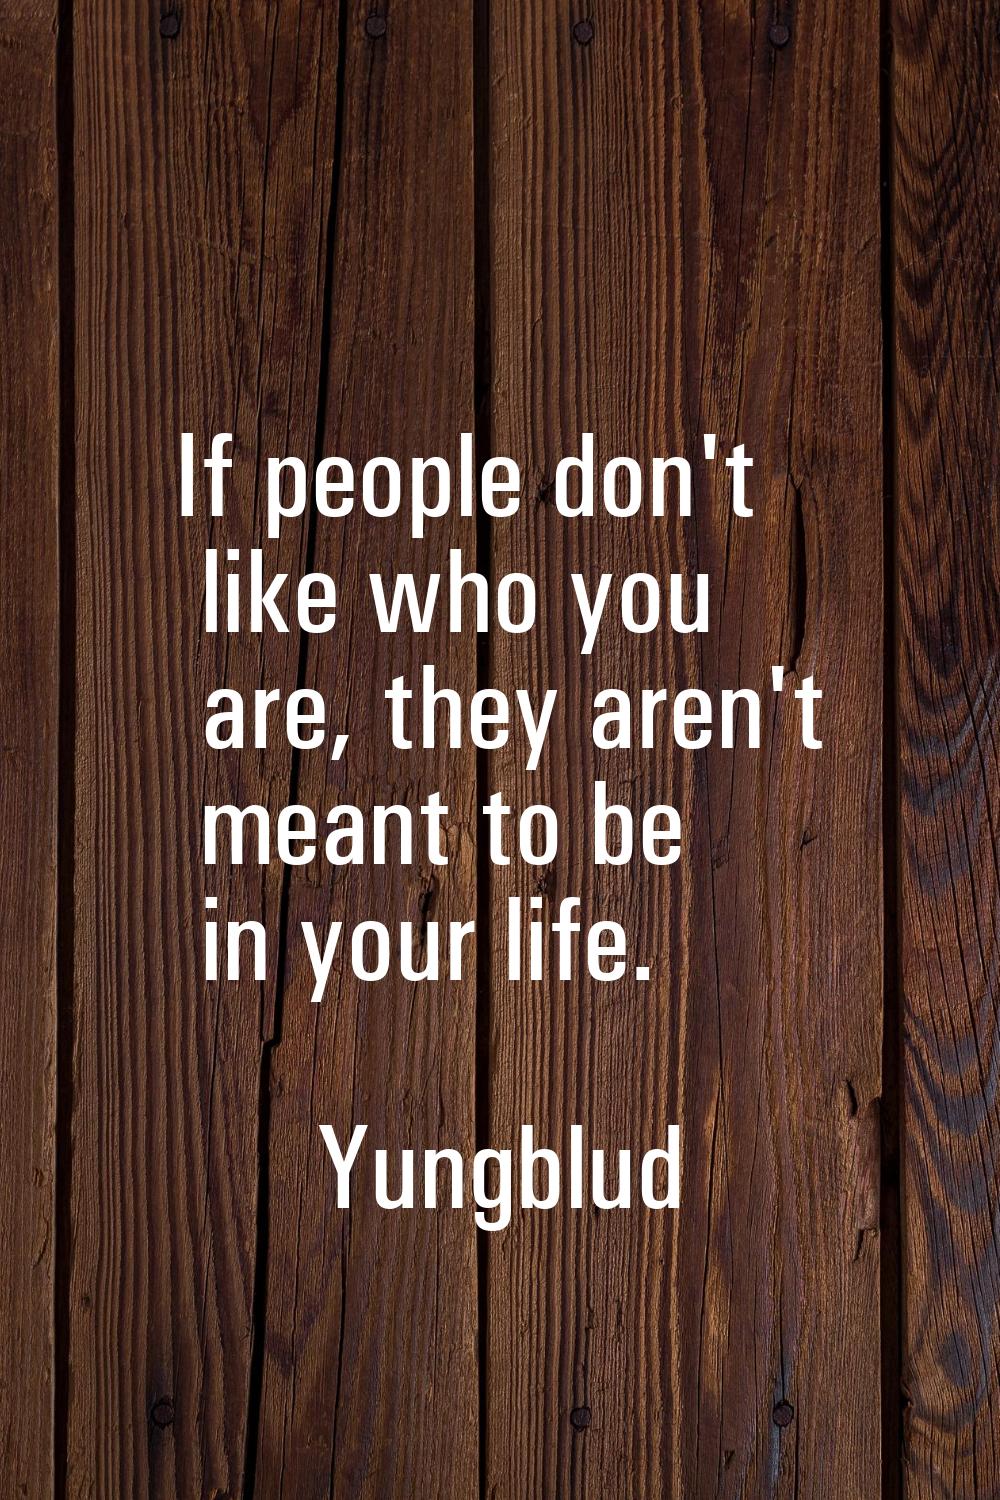 If people don't like who you are, they aren't meant to be in your life.